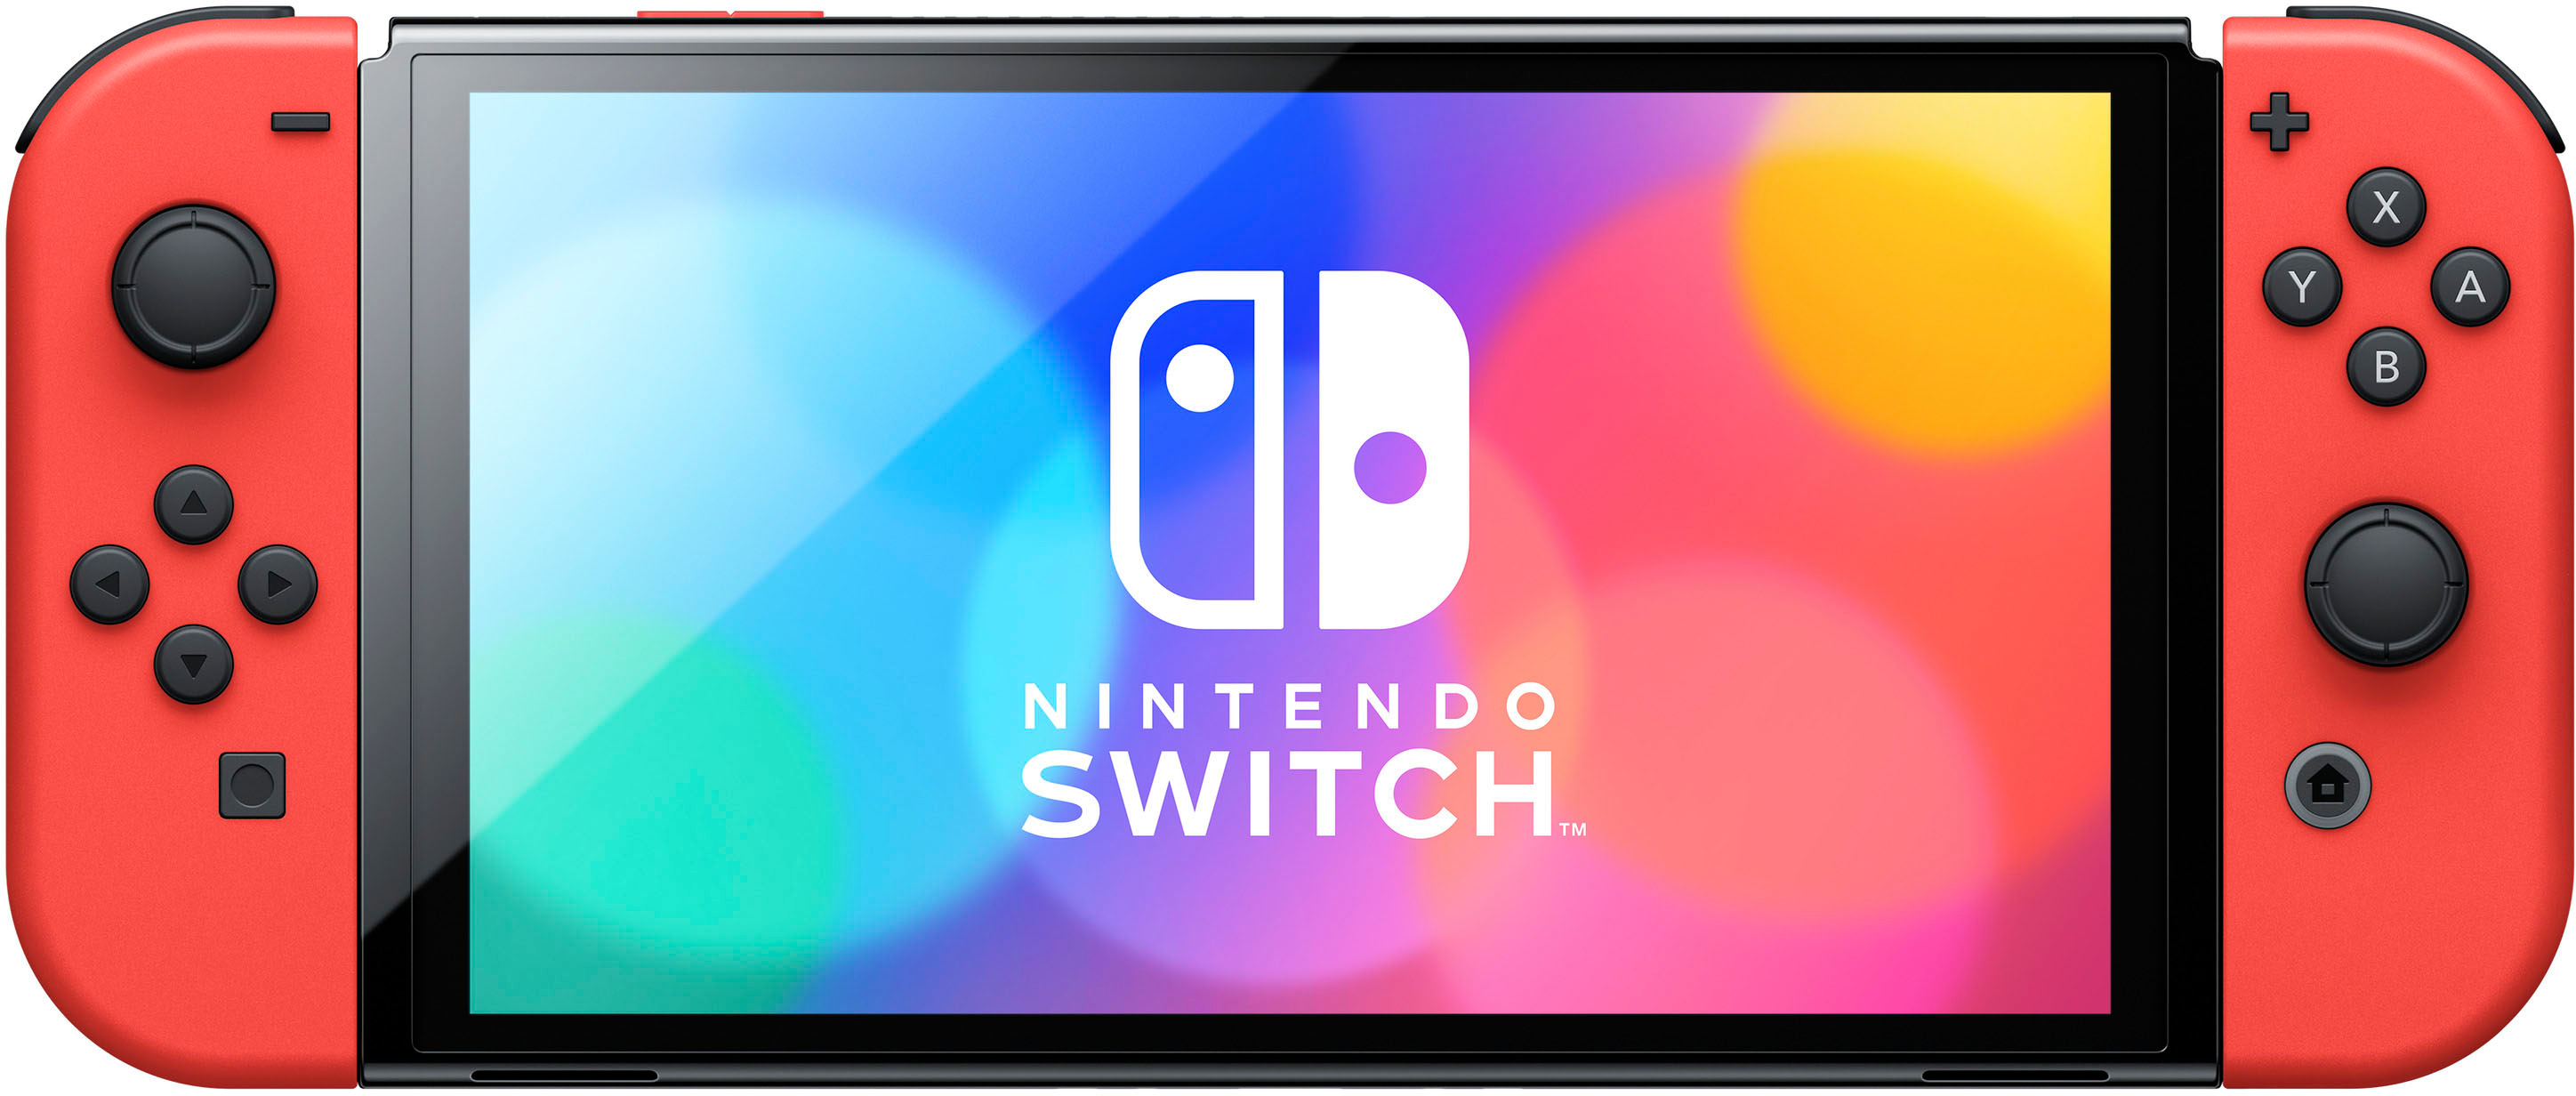 Angle View: Nintendo Switch - OLED Model: Mario Red Edition - Red